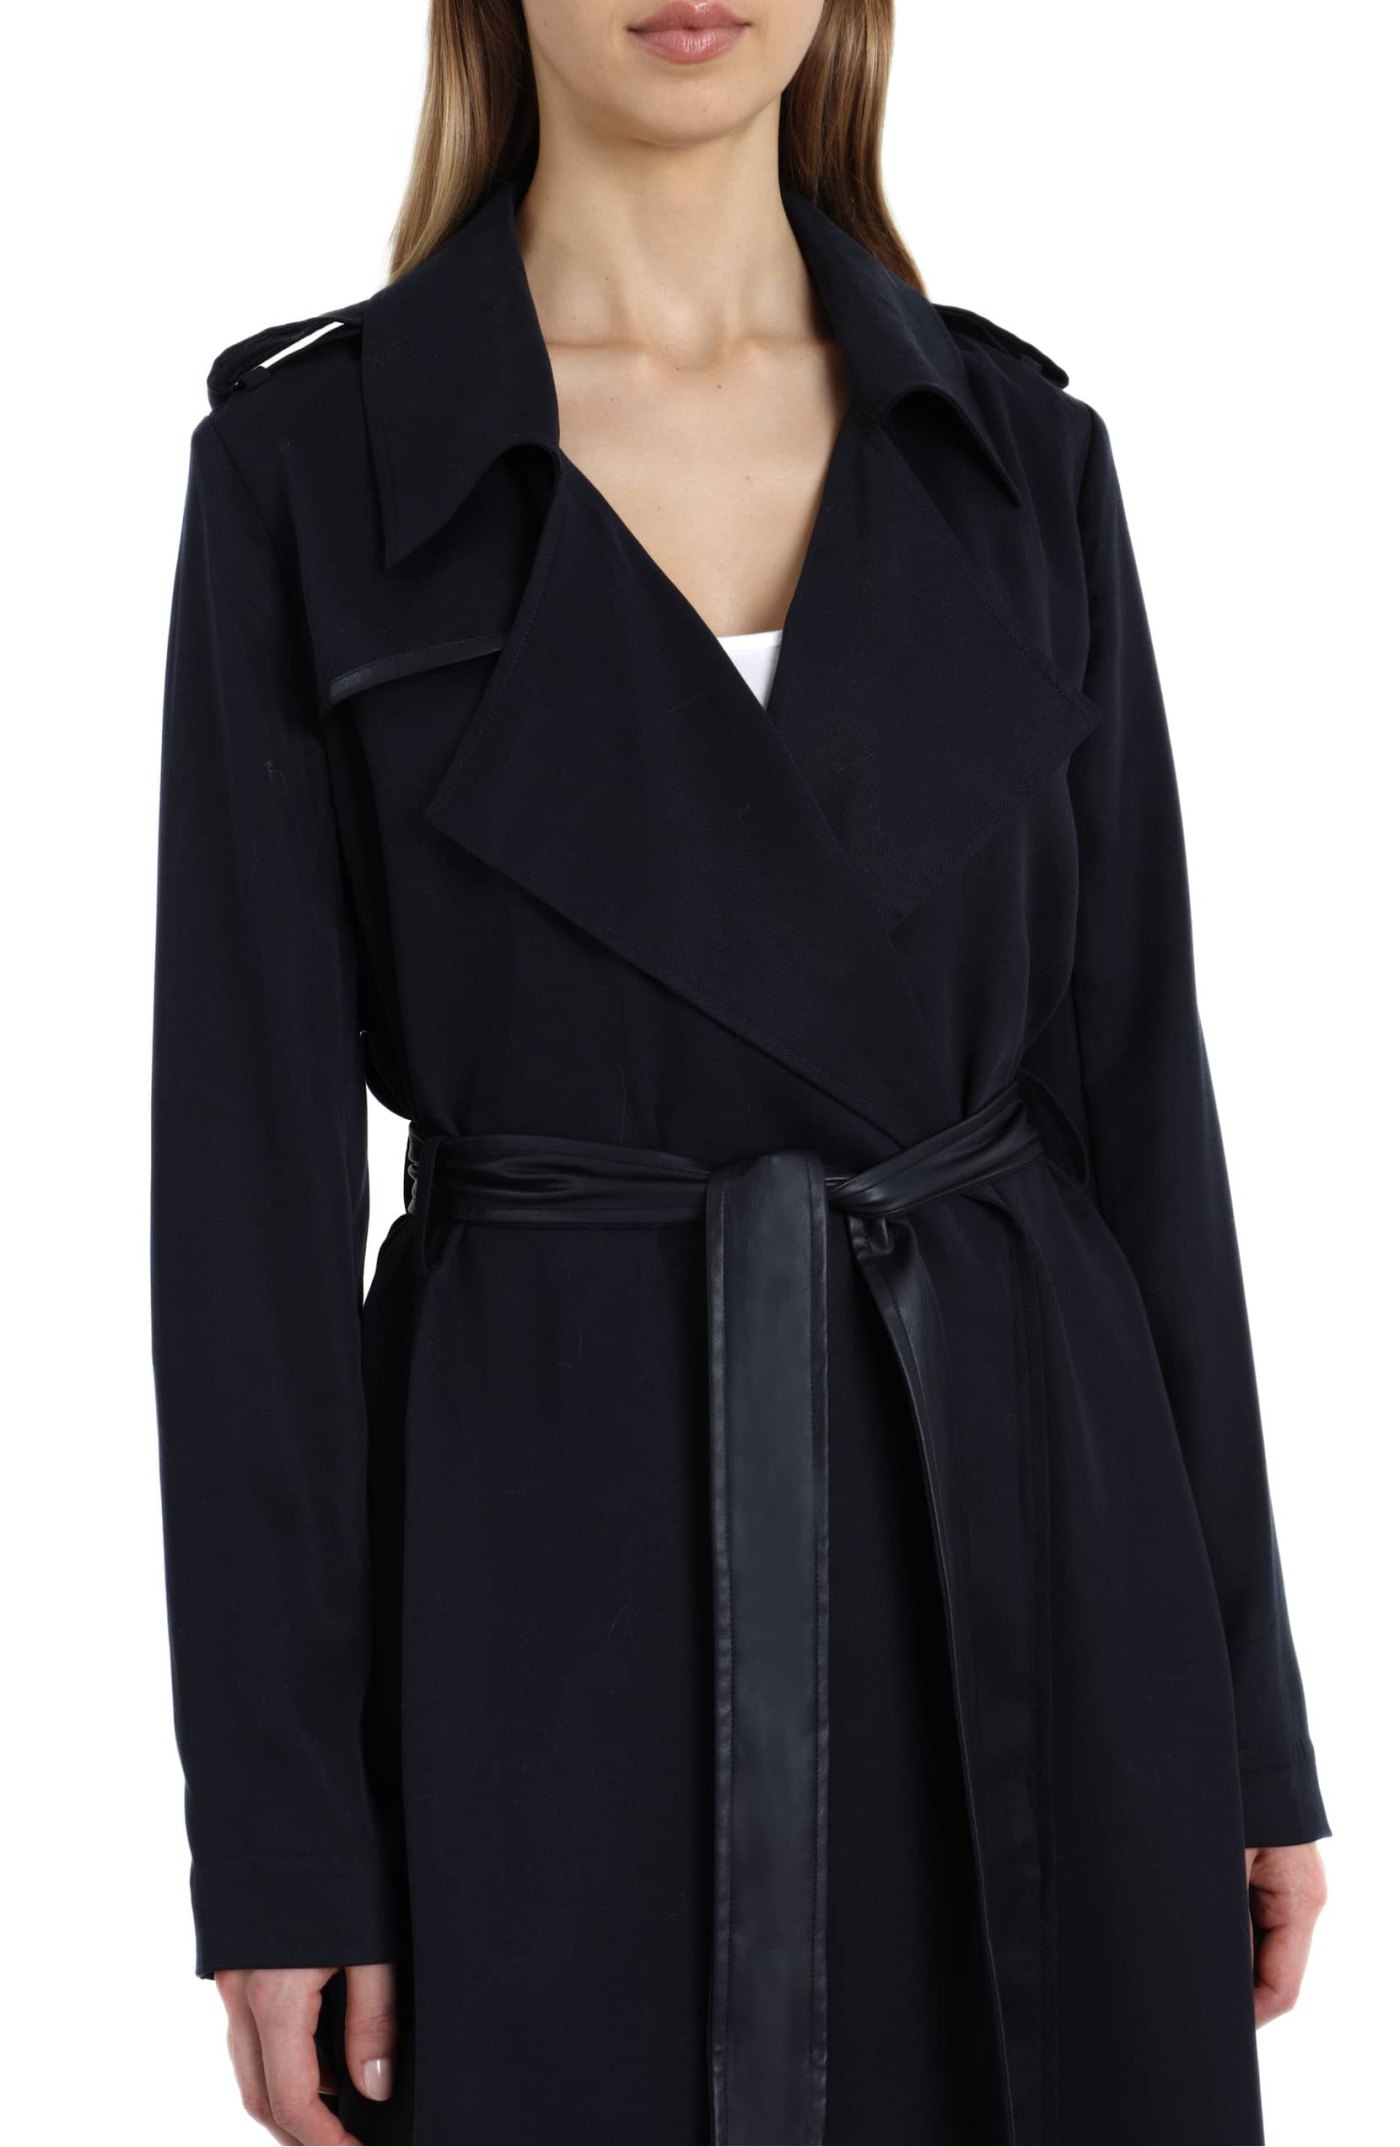 Nordstrom Sale: Shop This Badgley Mischka Trench Coat in Colors for Fall